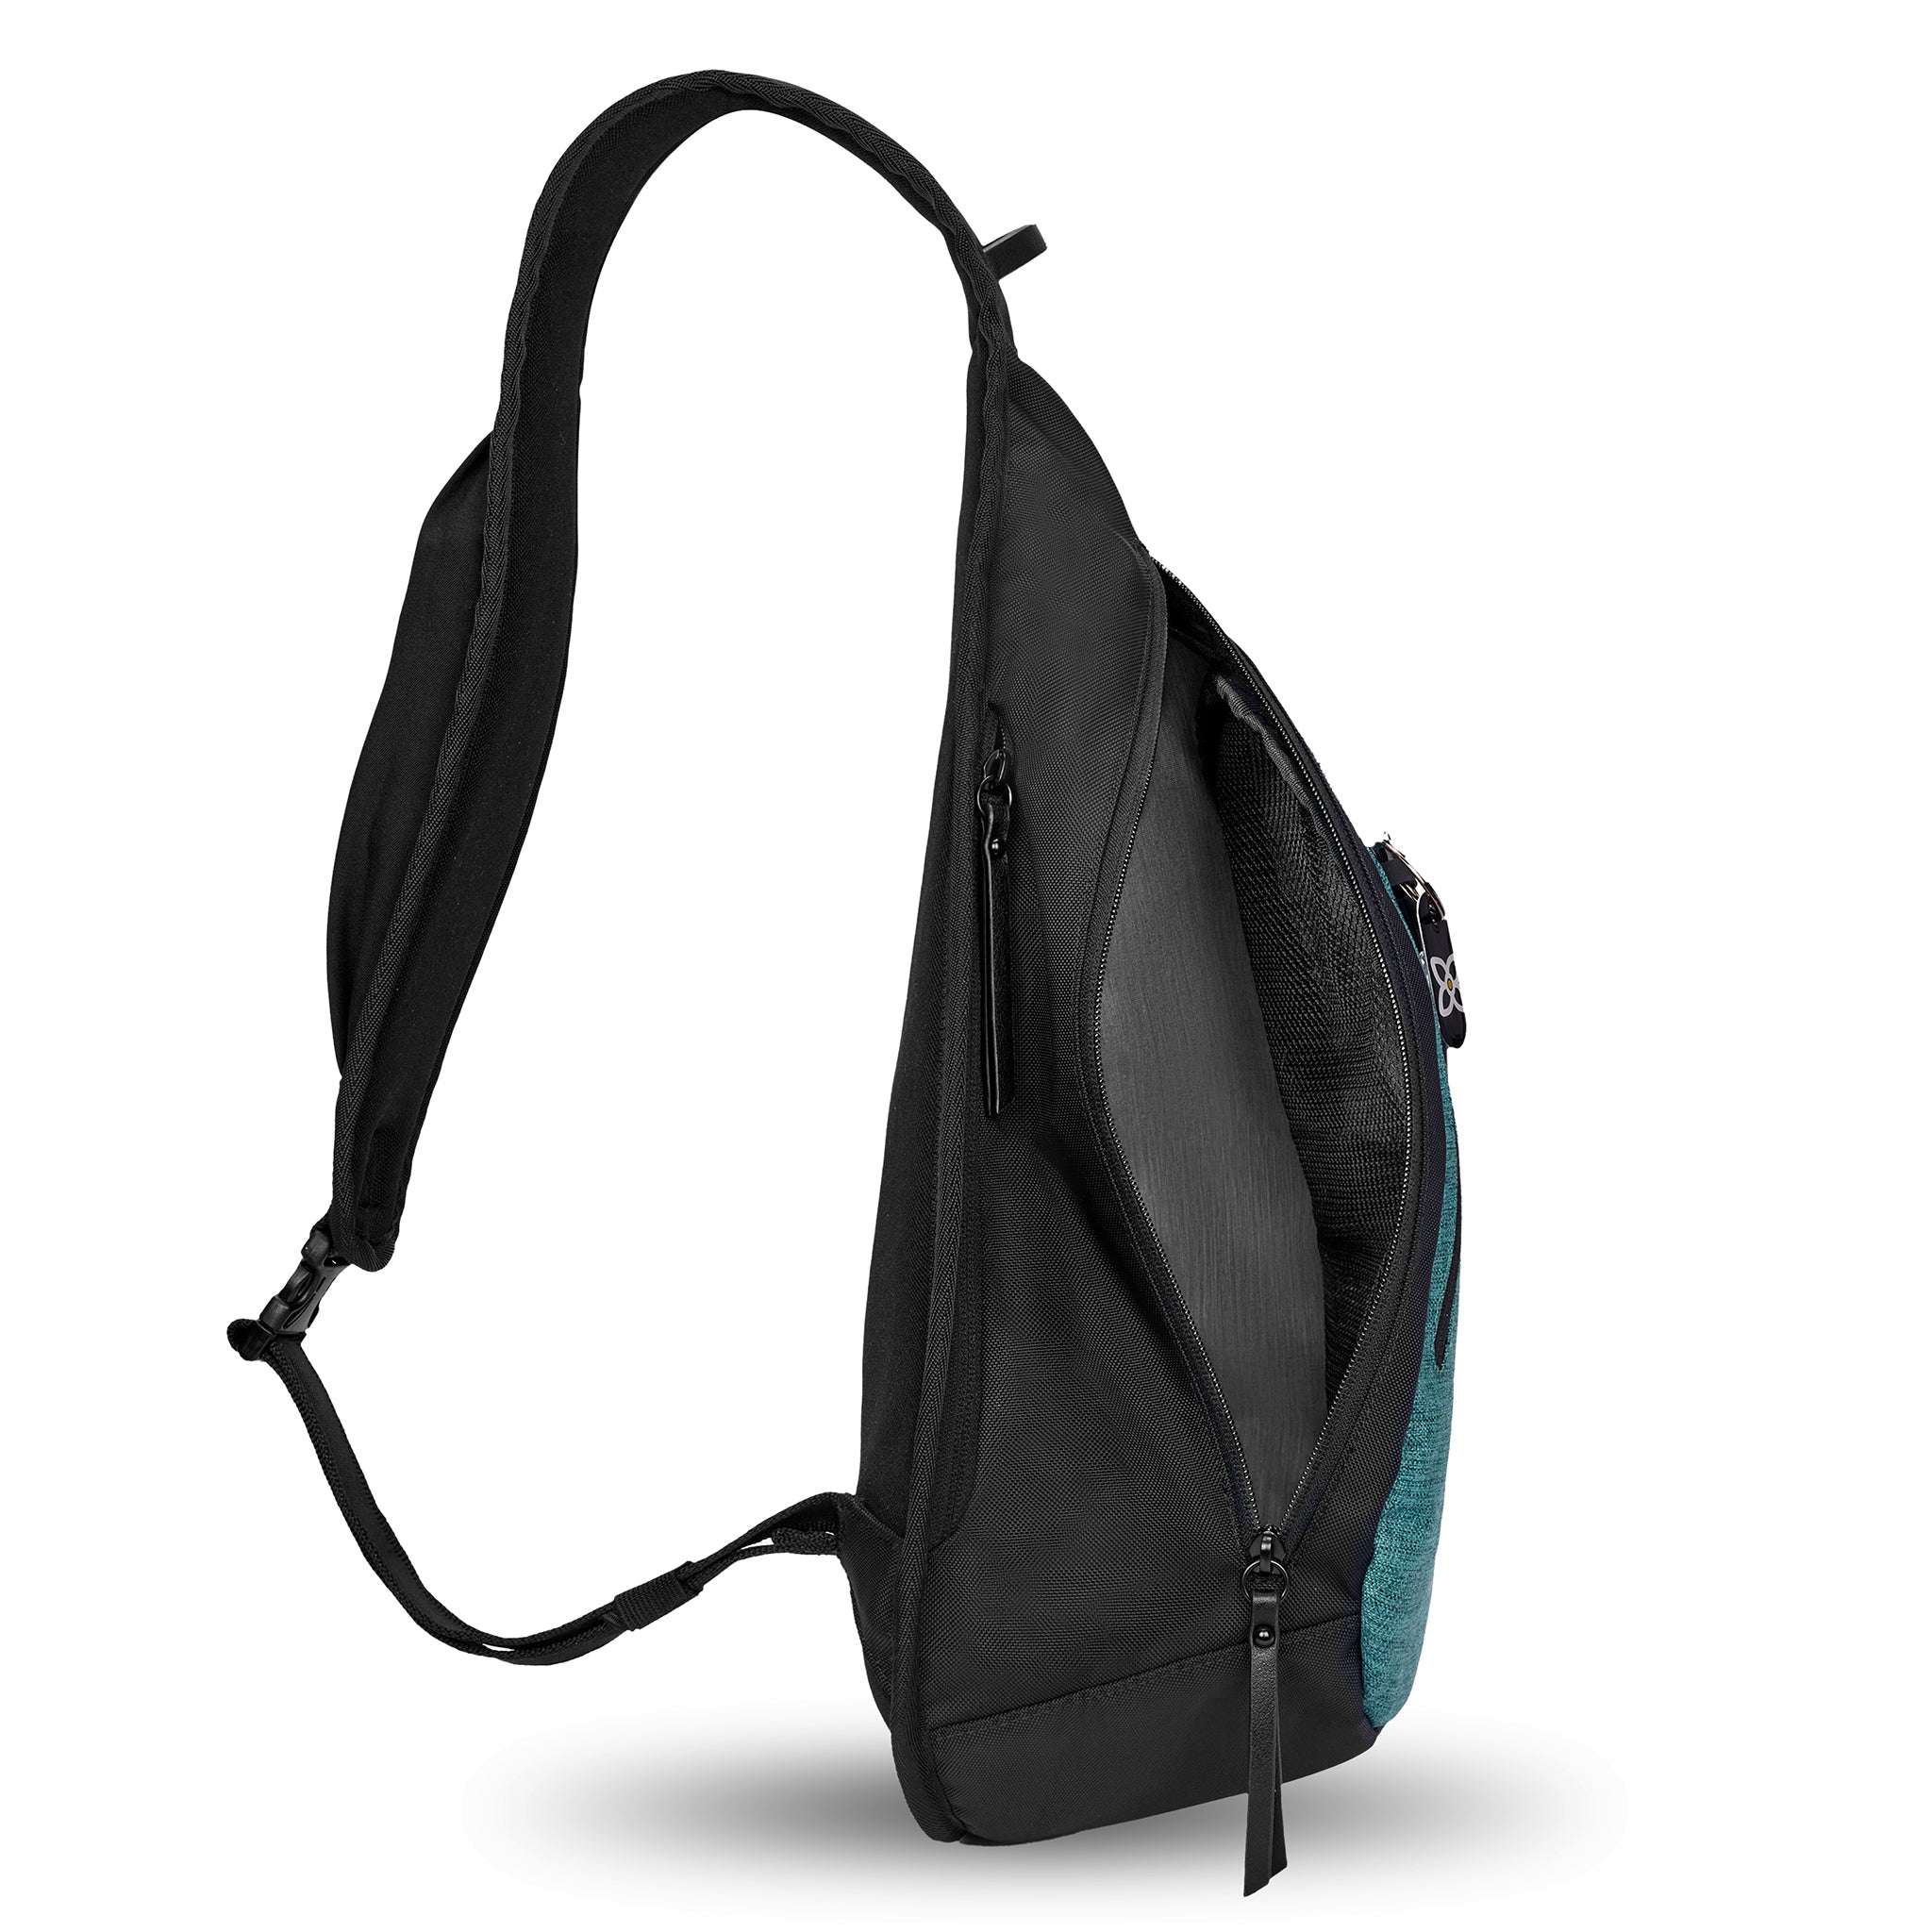 Side view of Sherpani’s Anti-Theft bag, the Esprit AT in Teal, with vegan leather accents in black. The main zipper compartment is open to reveal a pale blue interior. 